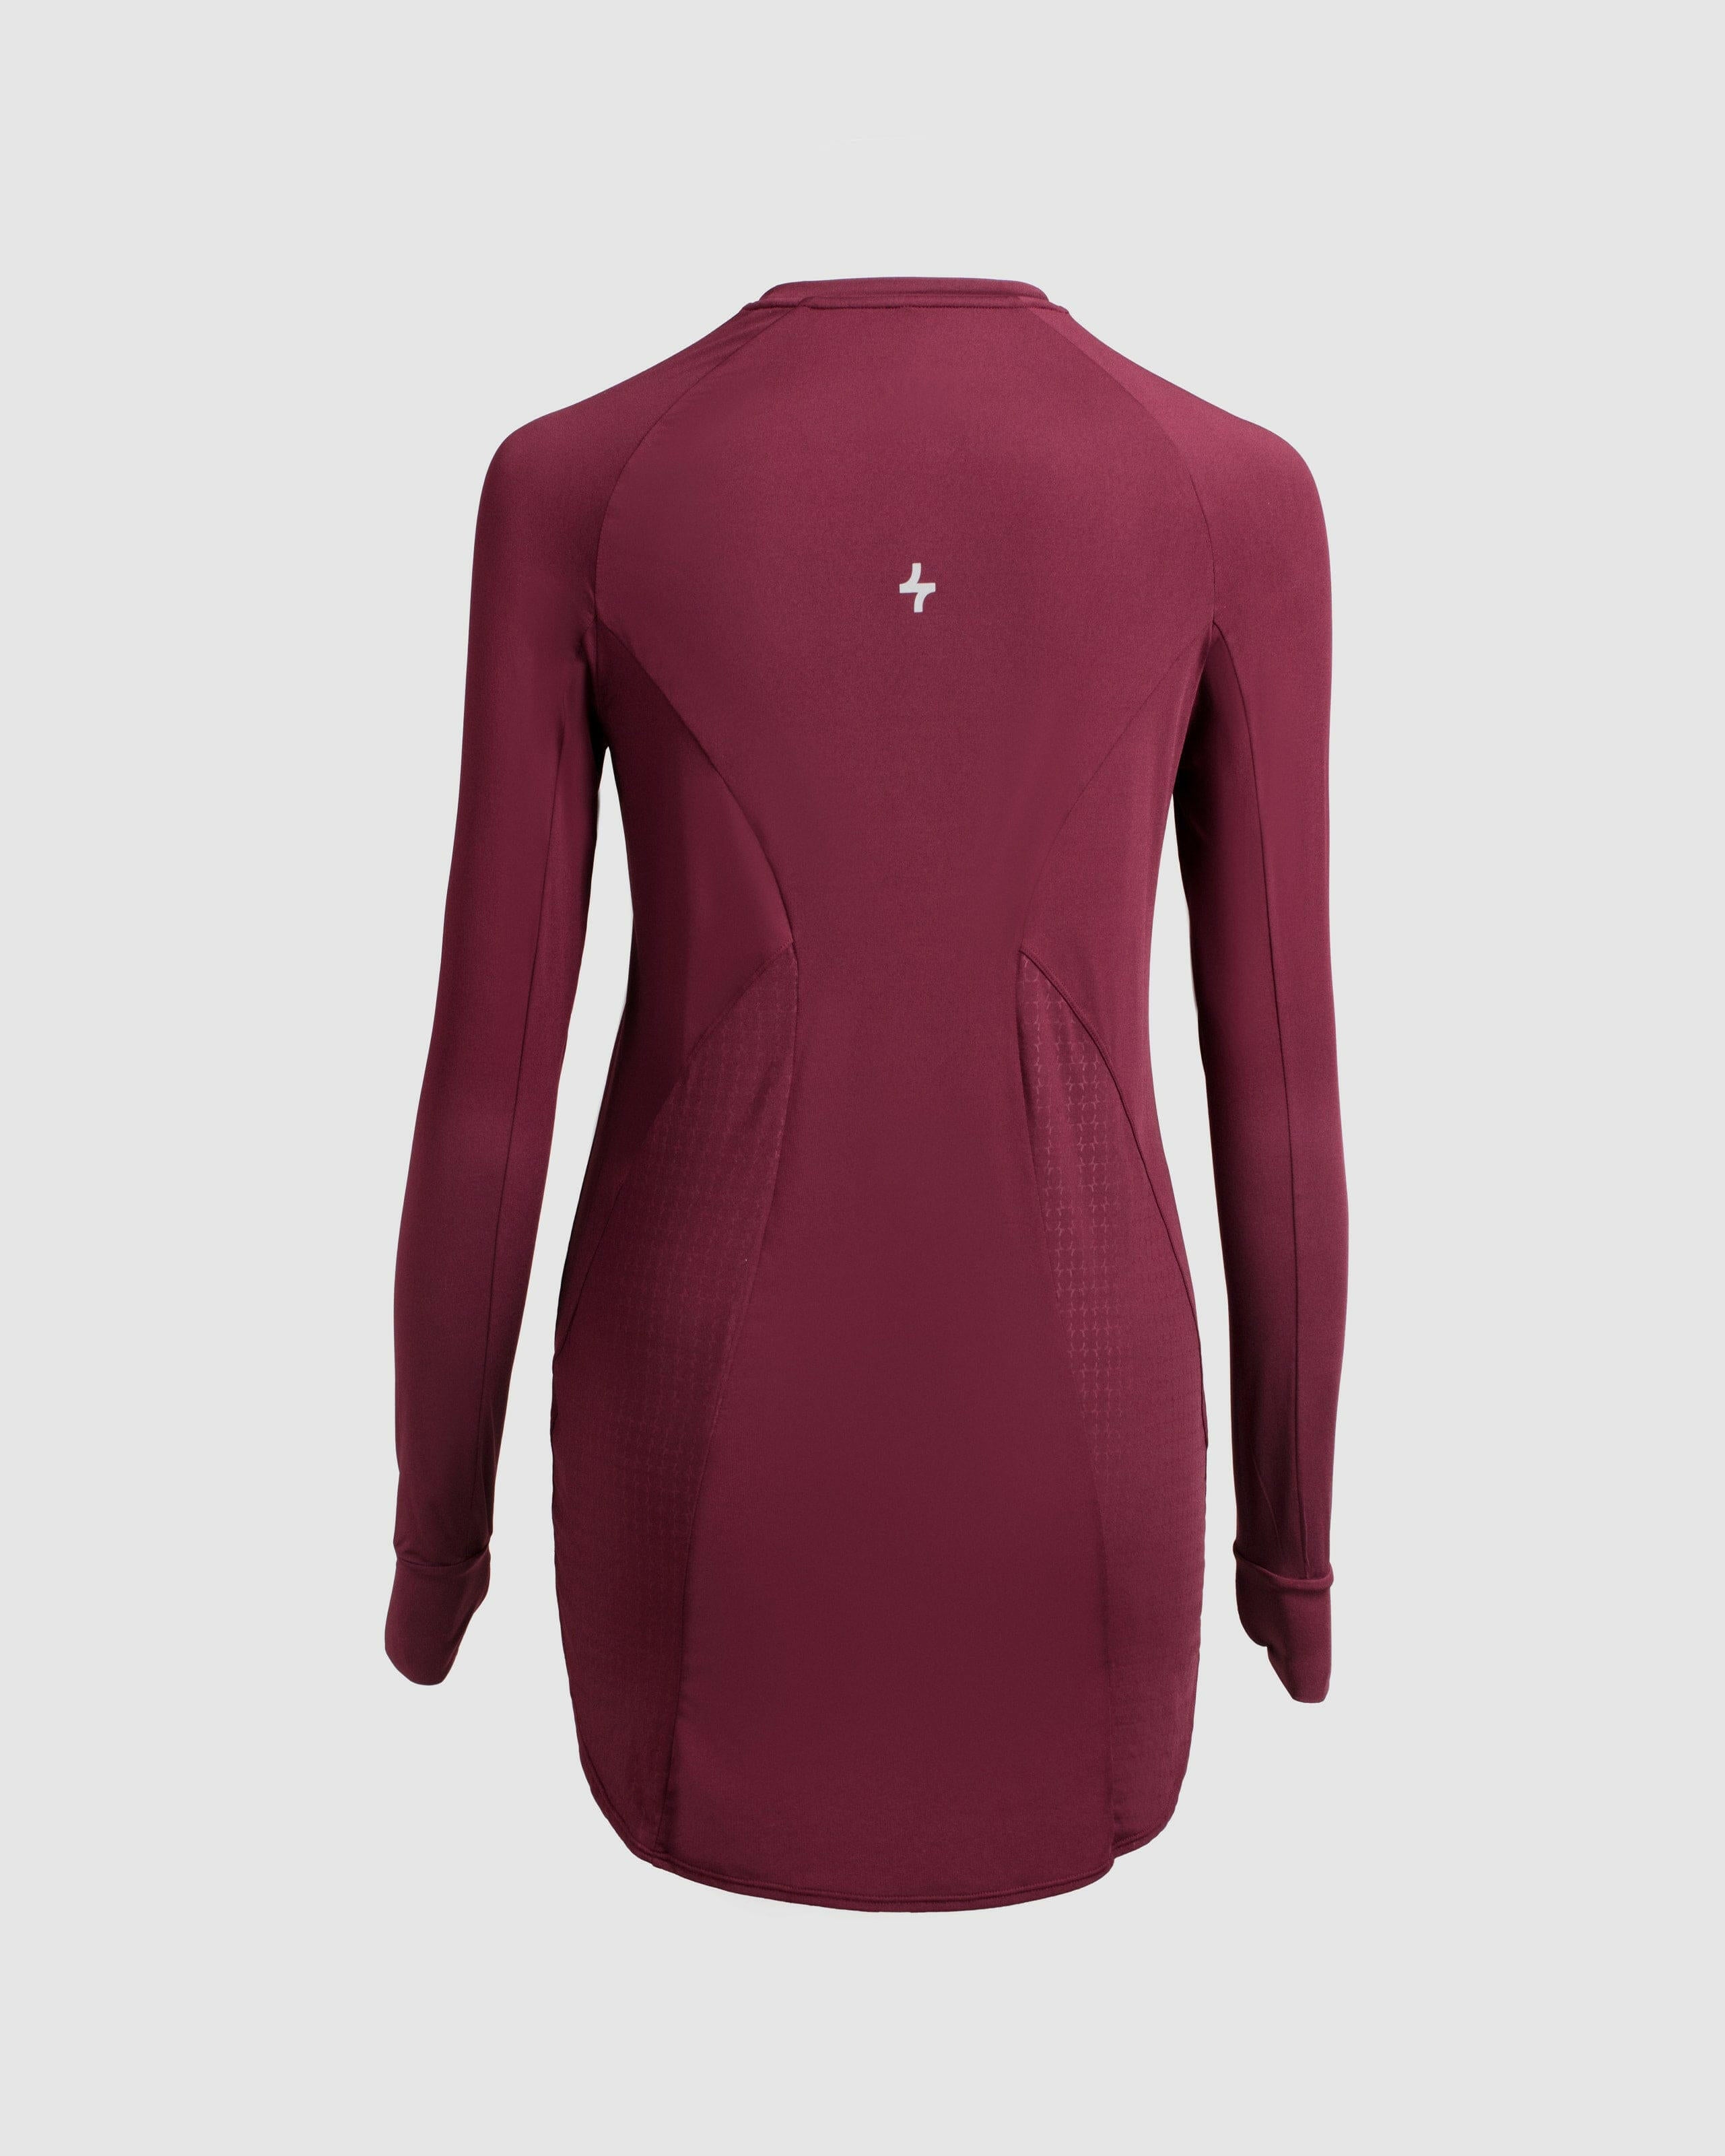 Back view of a modest maroon MOD LONG SLEEVE T-SHIRT by Qynda with mesh panels under the arms, featuring a Qynda logo centered below the neck and crafted from super light material.